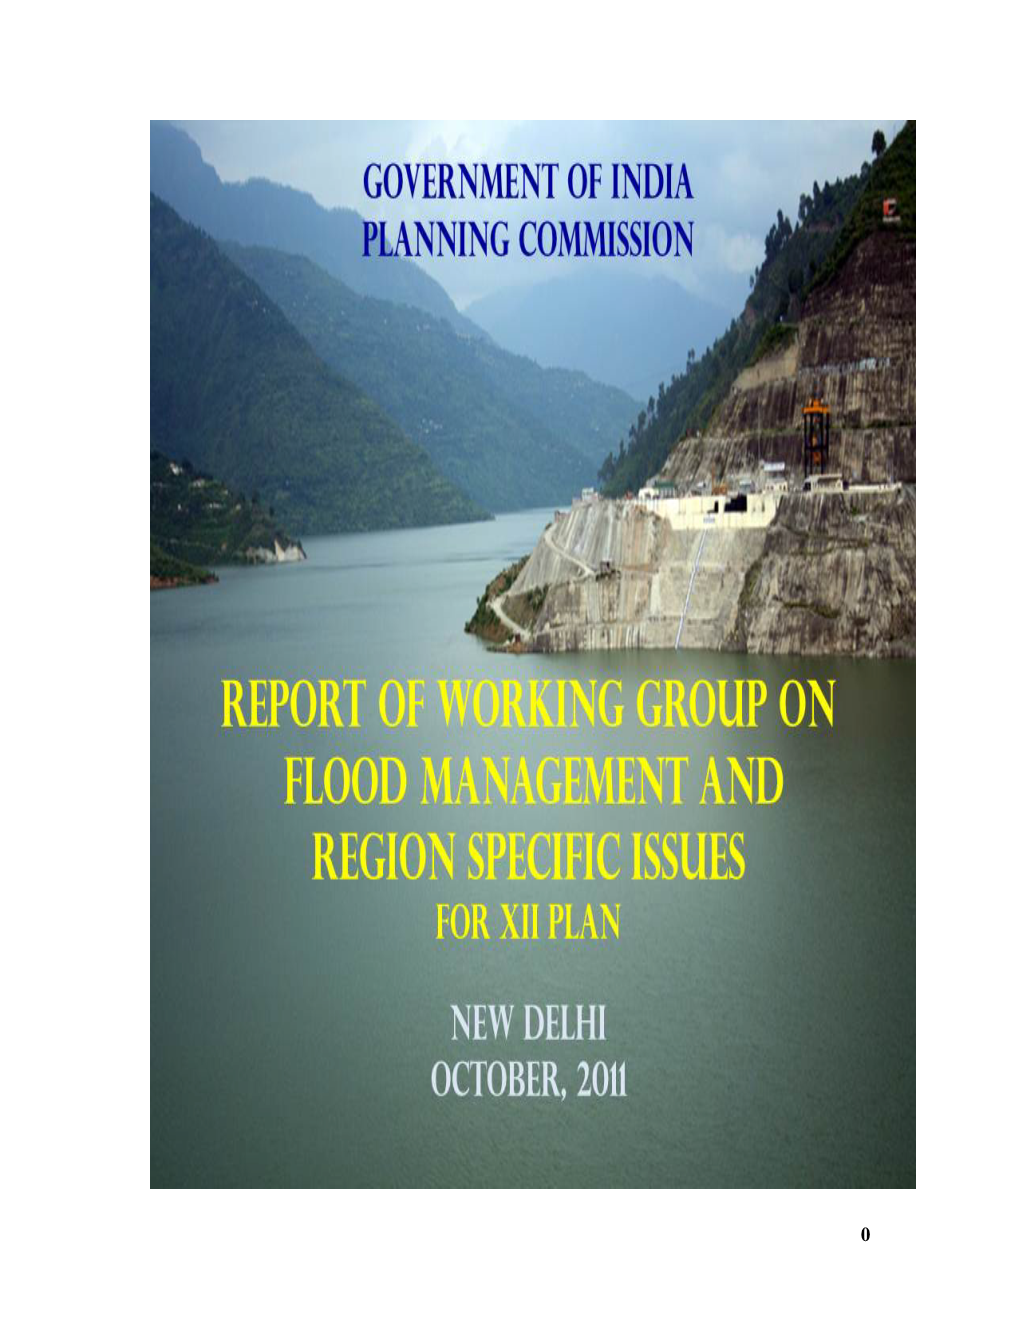 Report of the Planning Commission Working Group on Flood